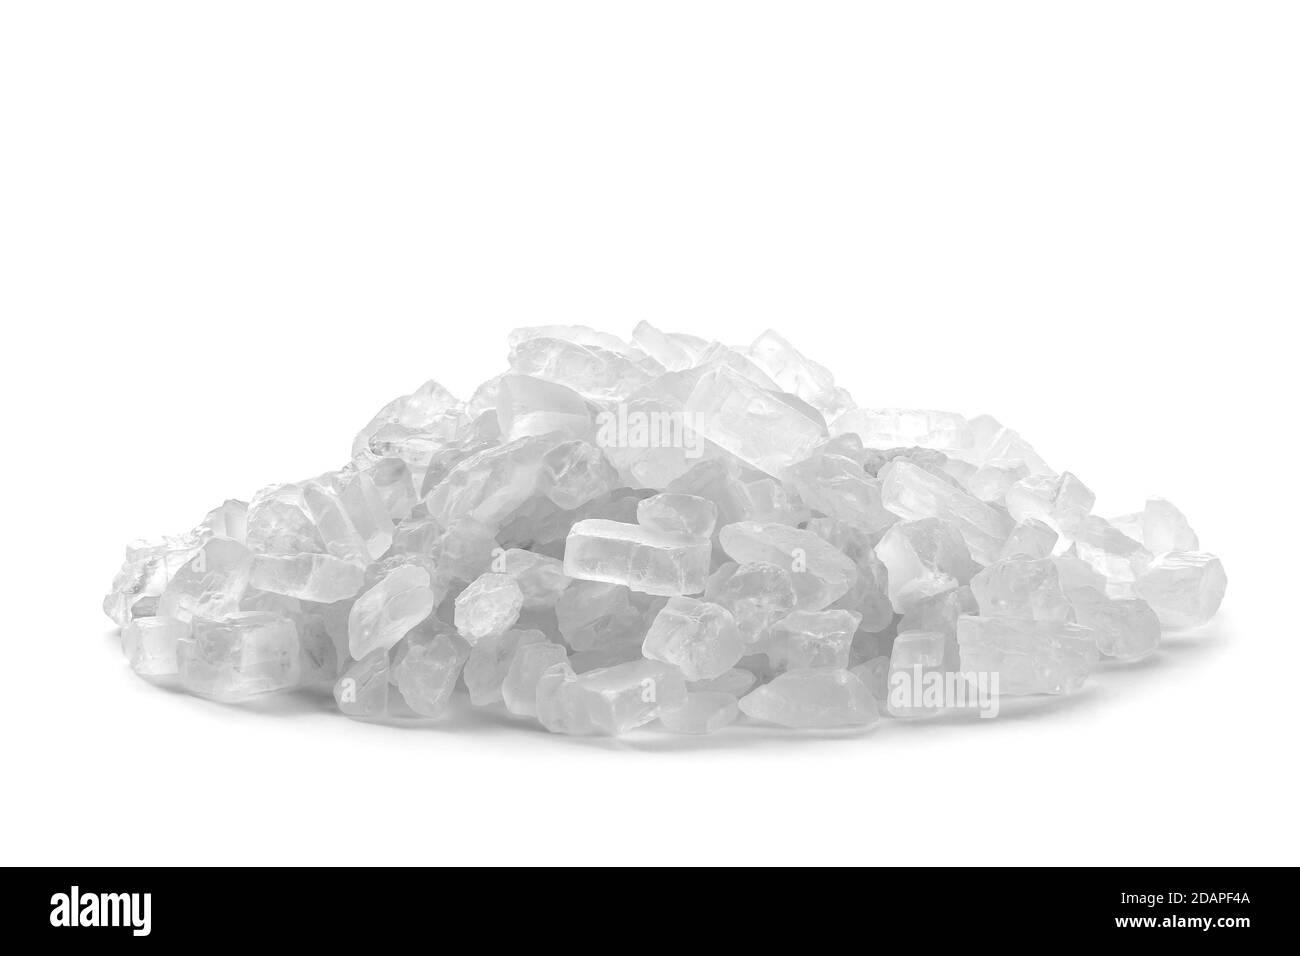 Sea salt crystals isolated on white background. Clipping path included Stock Photo